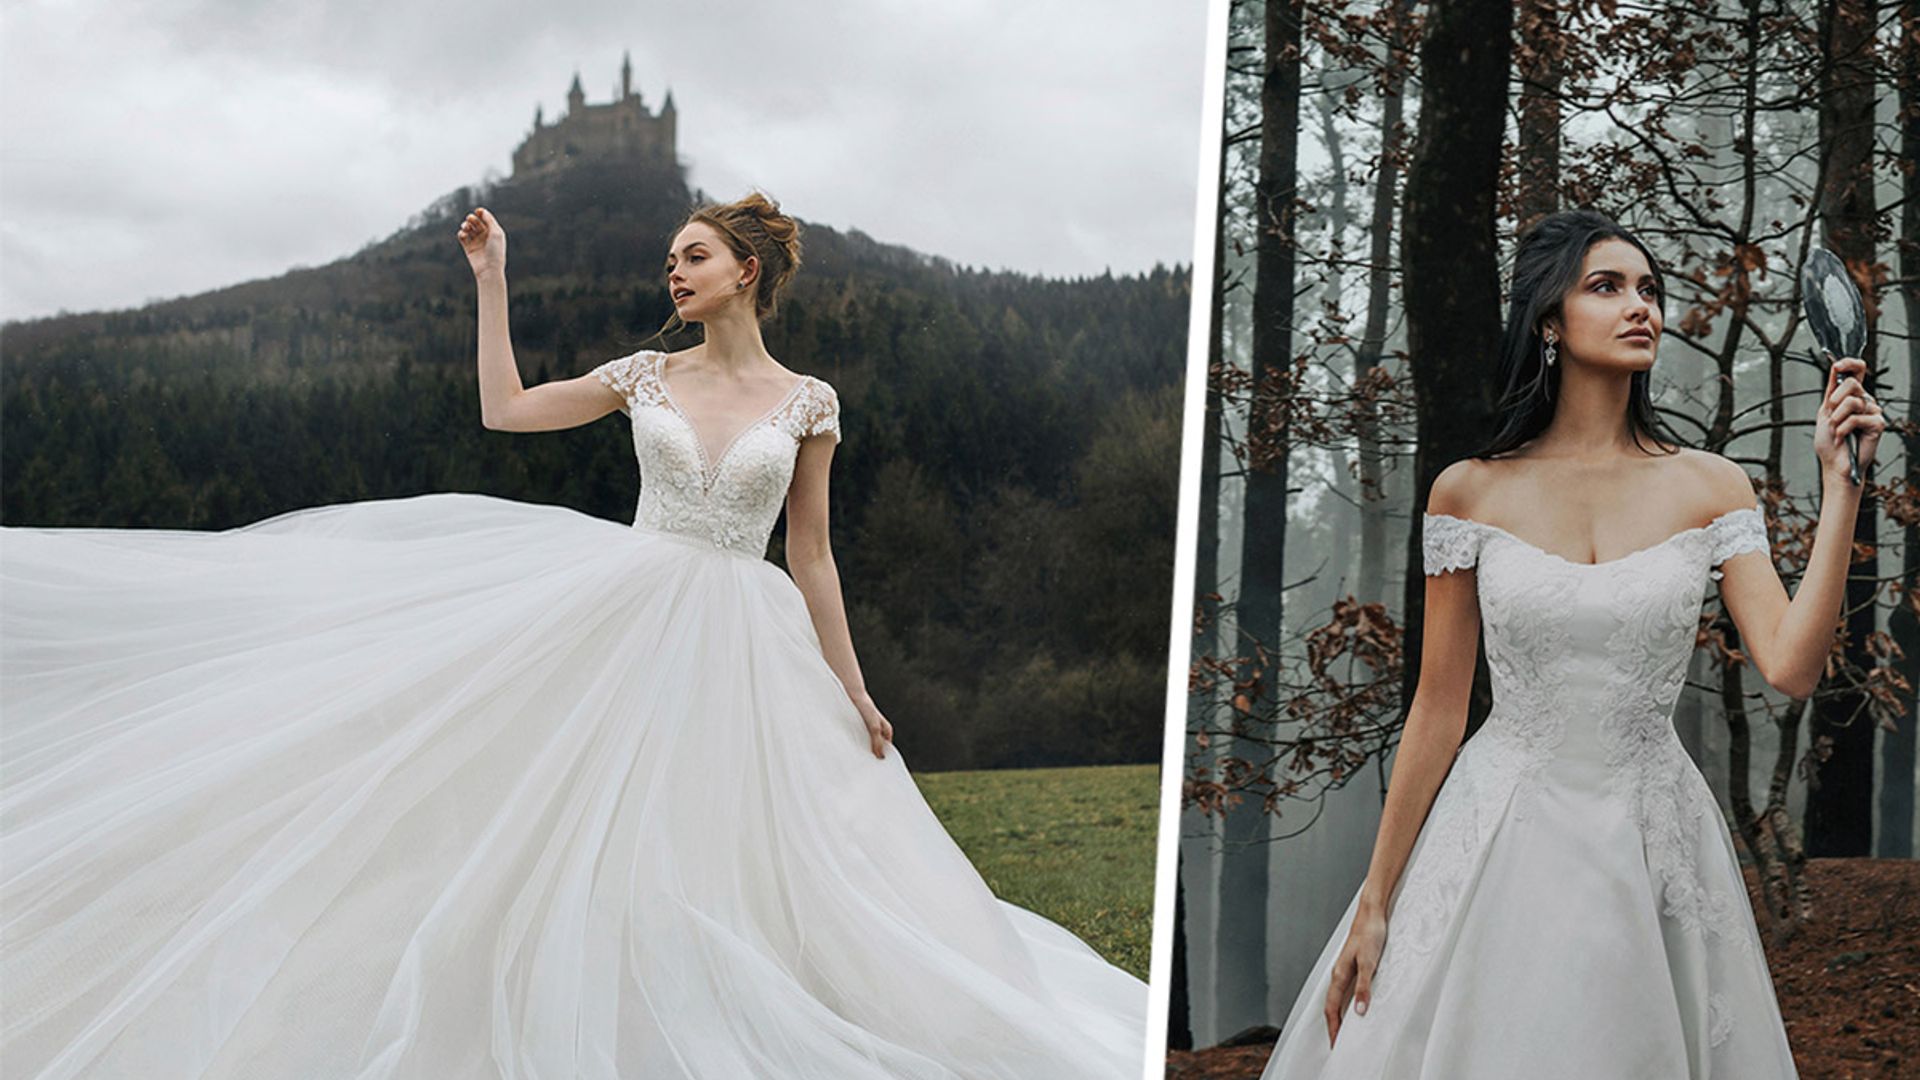 Disney's wedding dress line is finally launching in the UK for your fairytale wedding